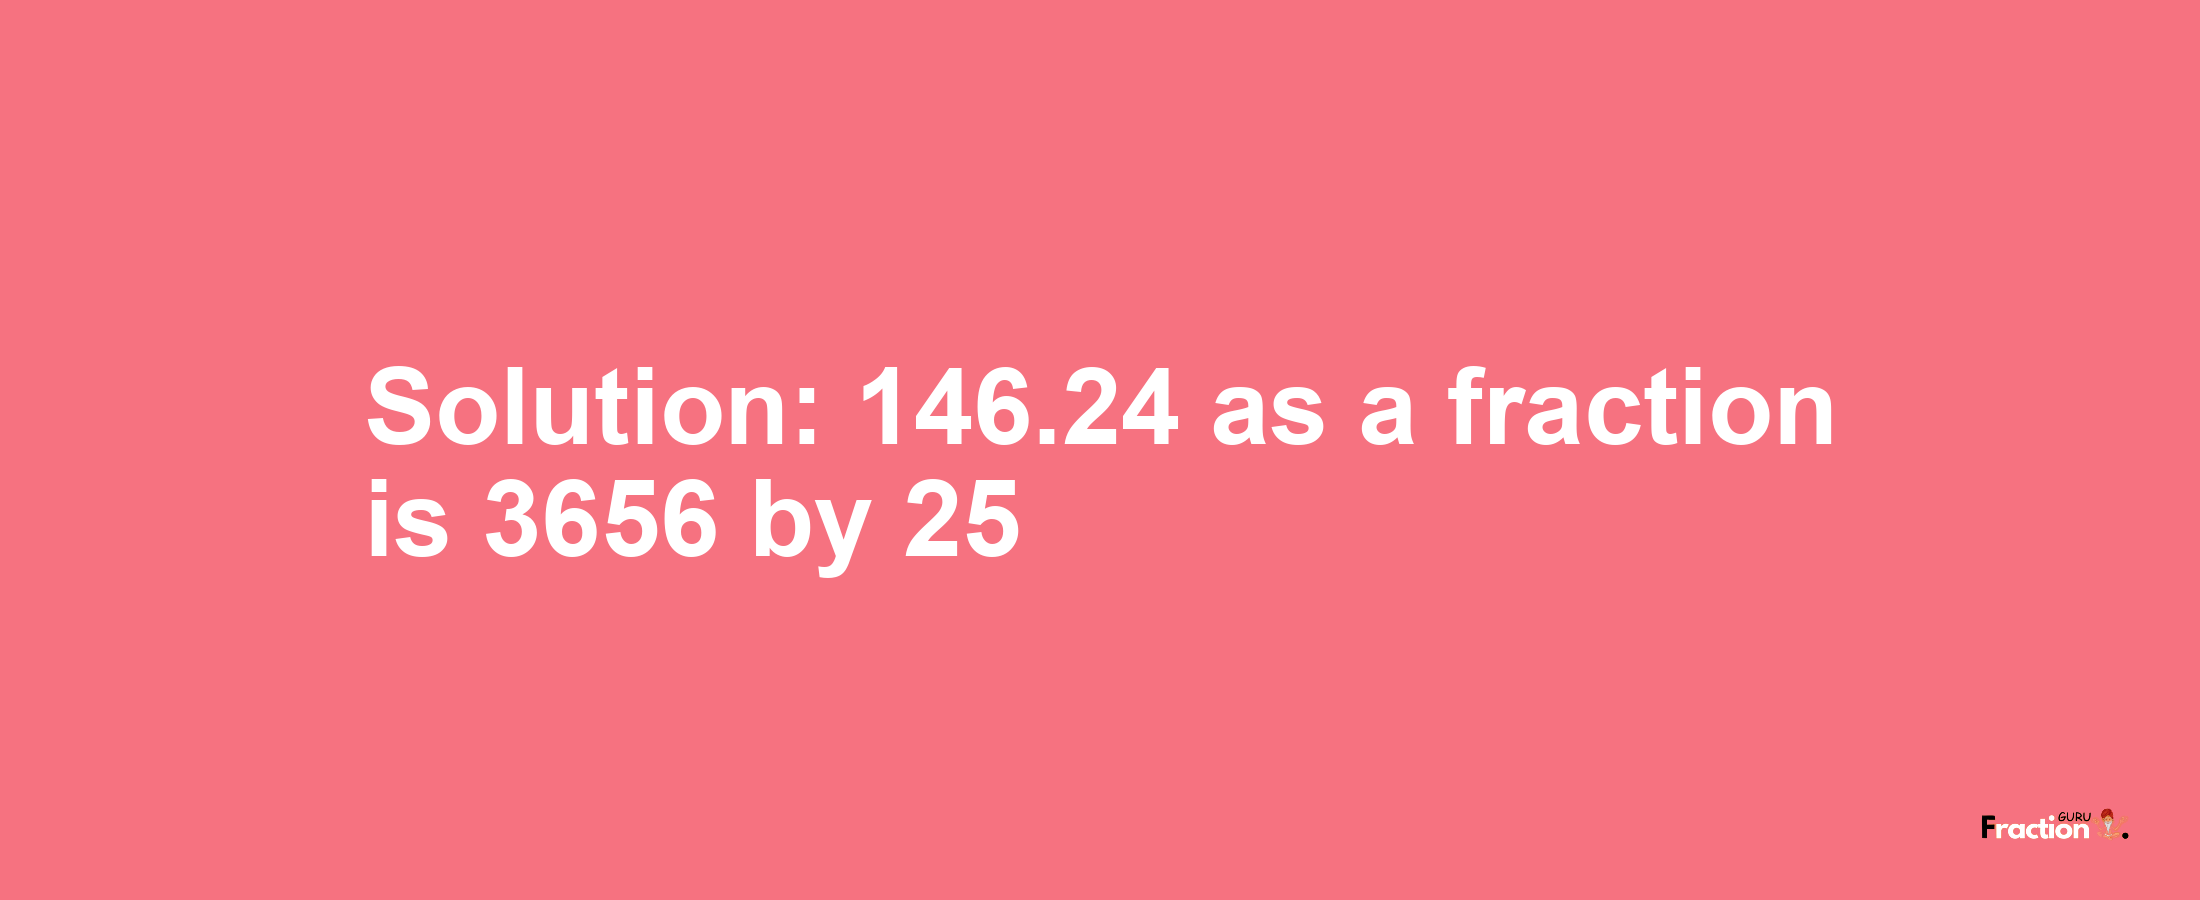 Solution:146.24 as a fraction is 3656/25